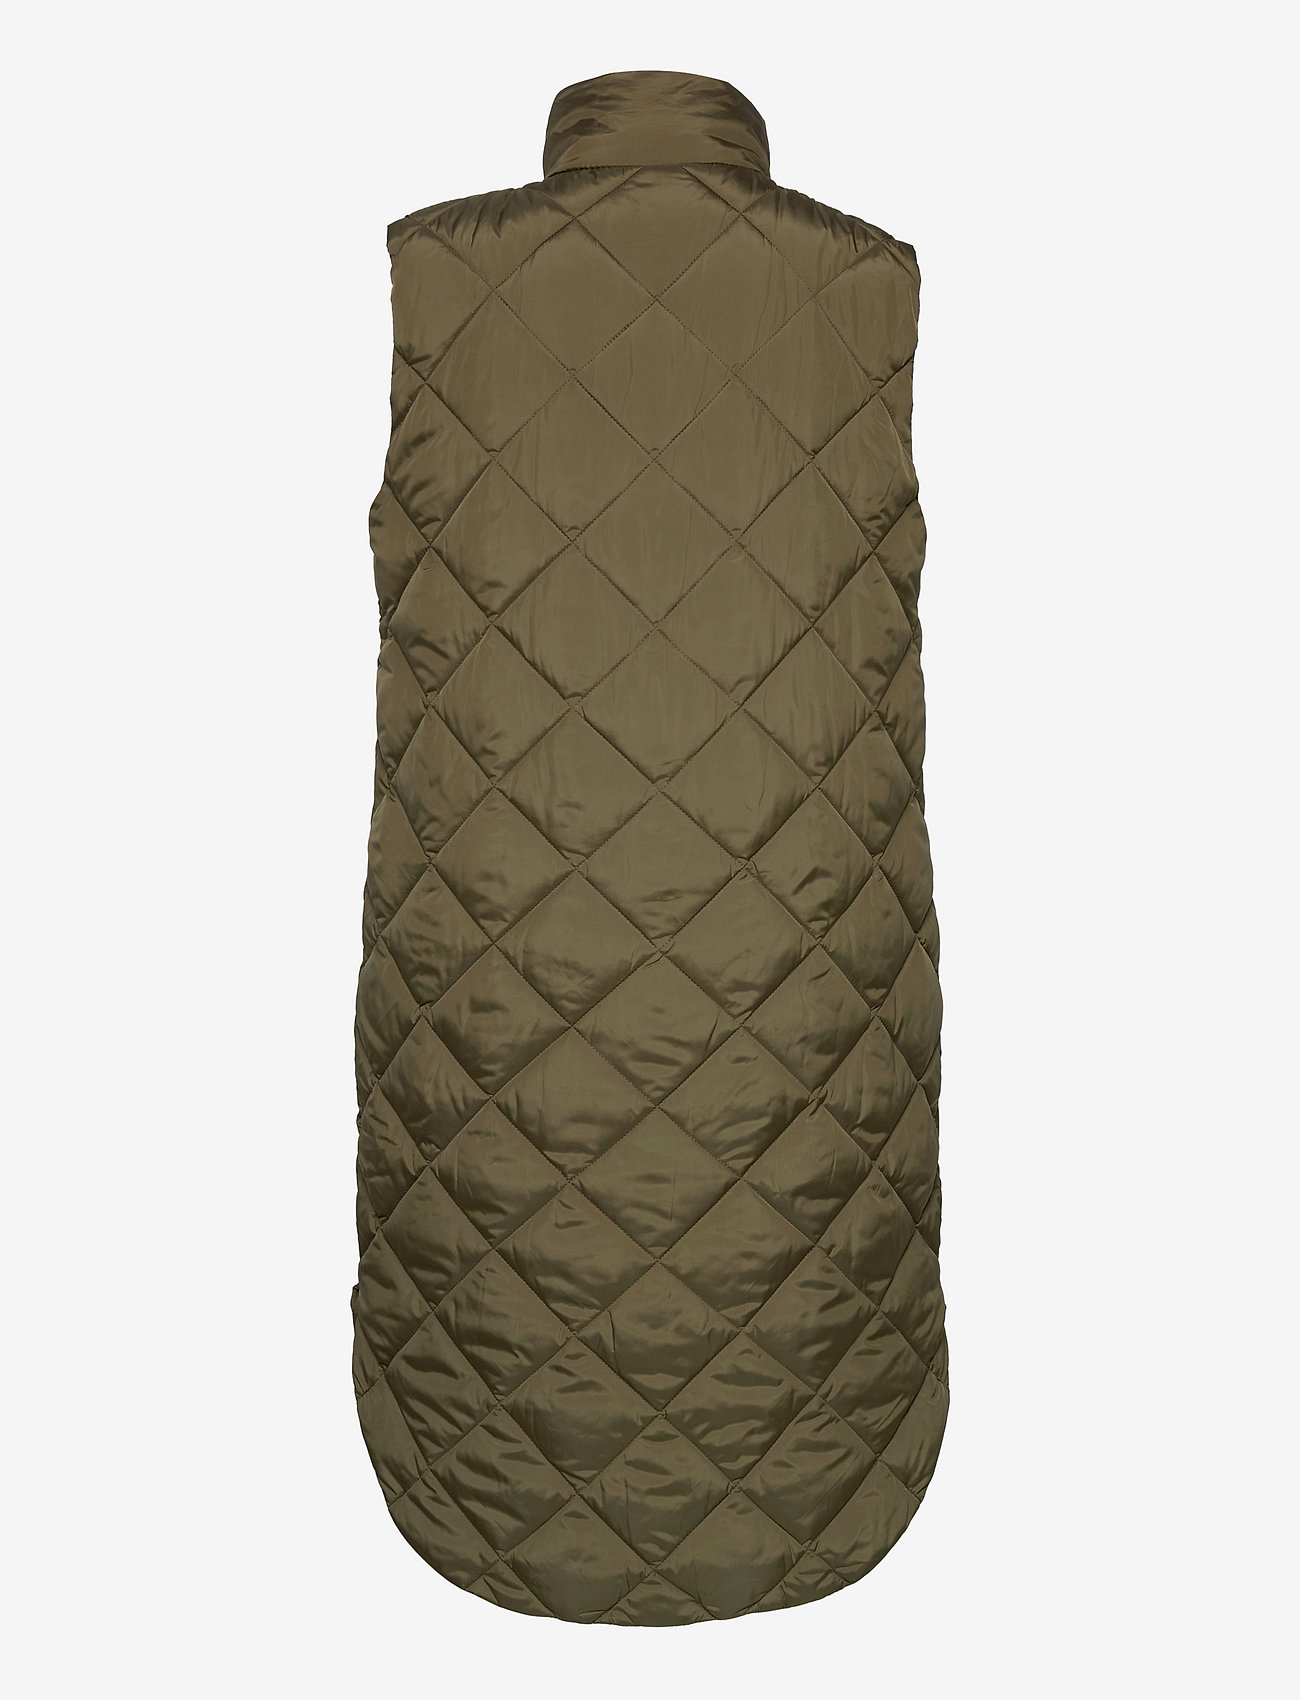 FREE/QUENT - FQOLGA-WA - quilted vests - olive night 19-0515 - 1